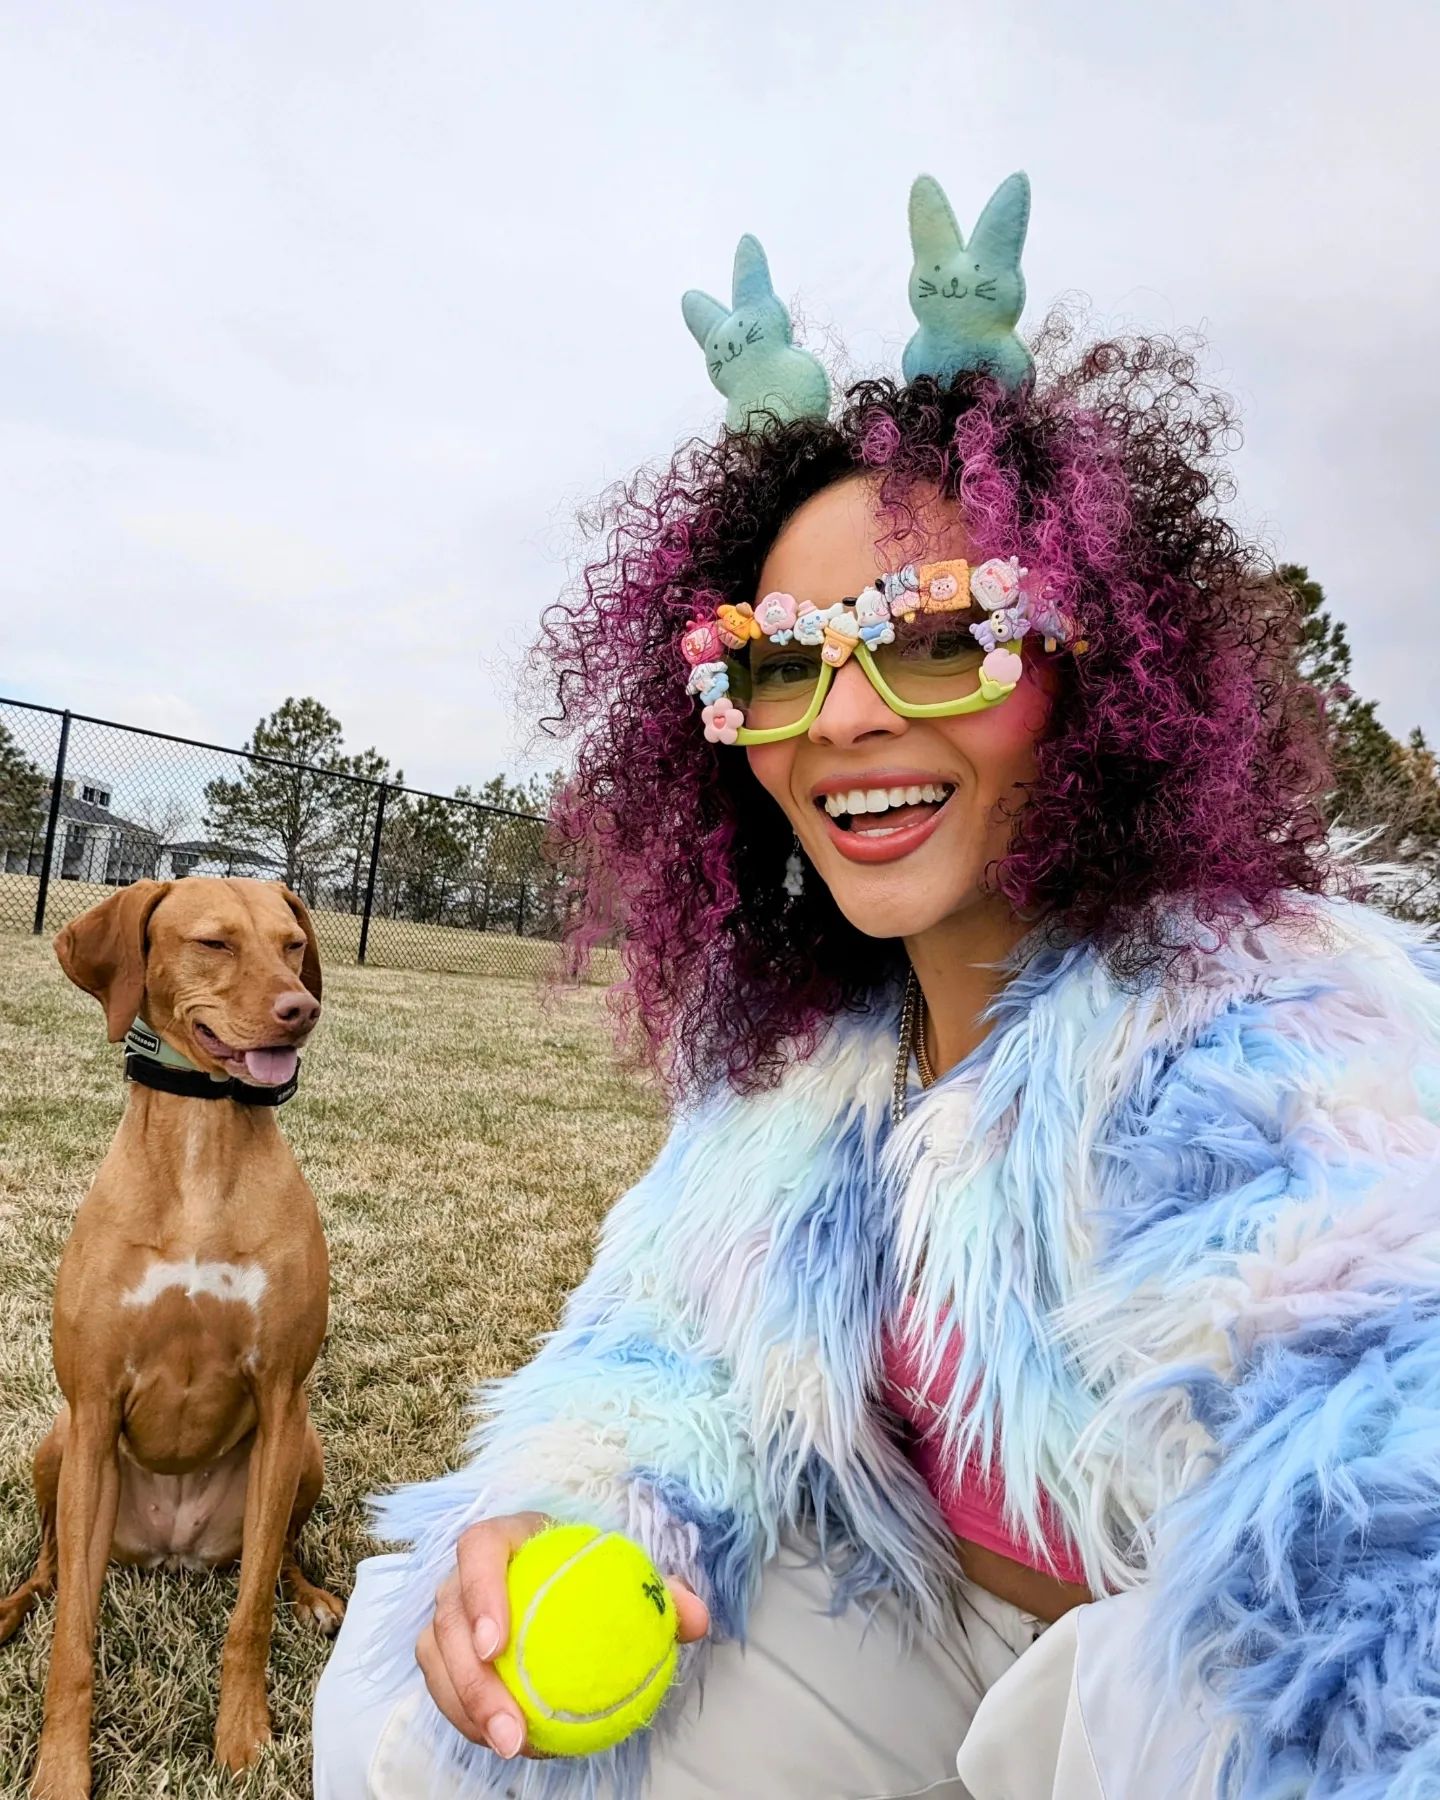 Hoppy Easter 🐇🐣 from baby Bee-mo 🐕 and me 💞💝 #happyeaster #eastersunday #easterbunny